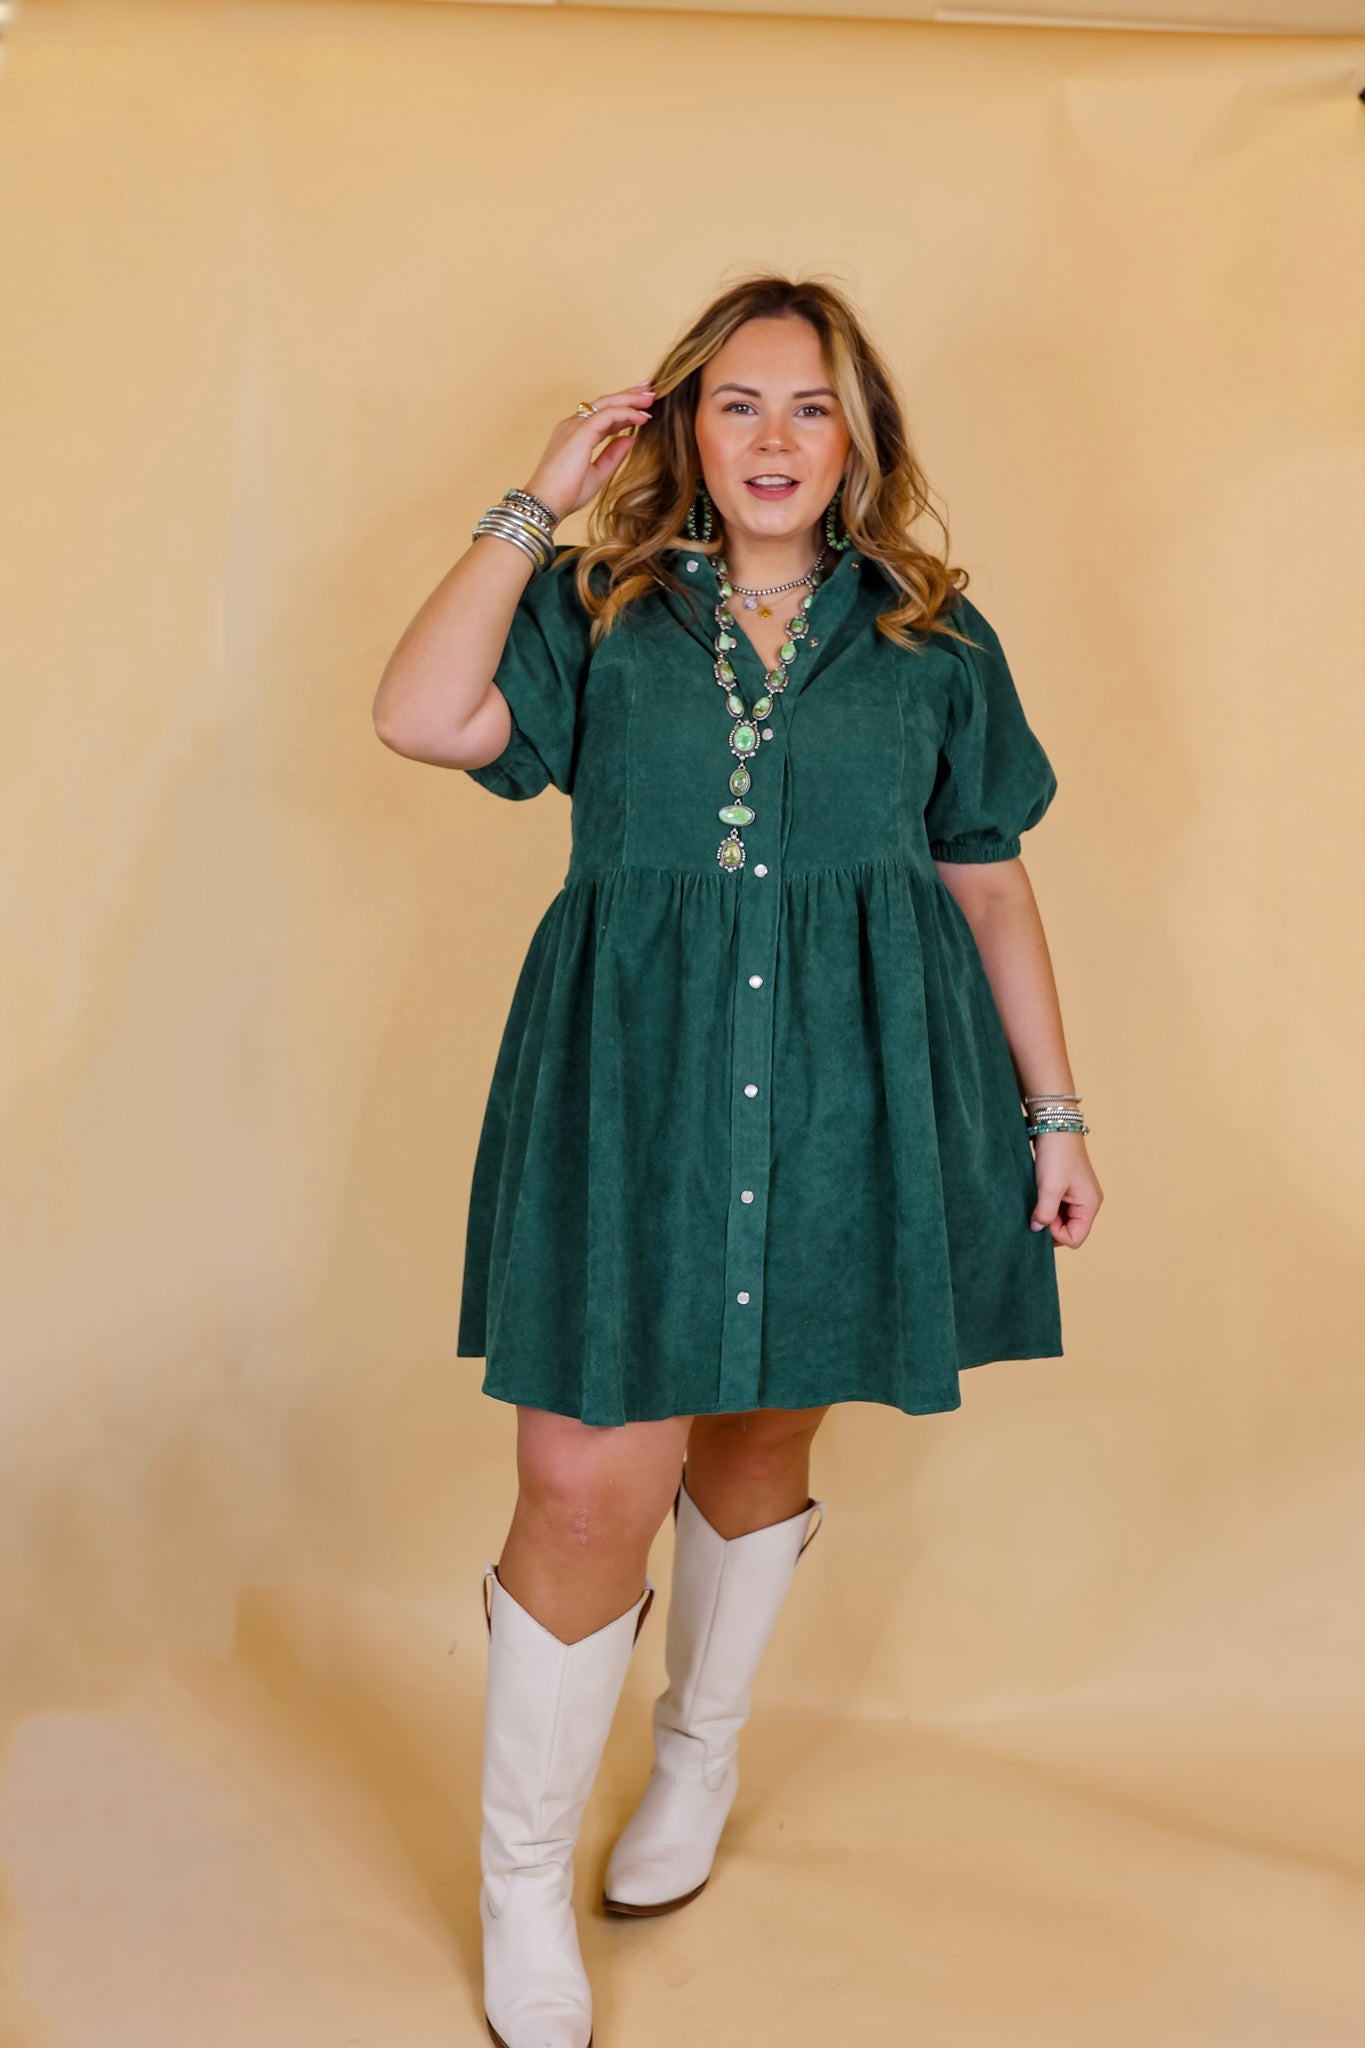 Adventures Ahead Button Up Corduroy Babydoll Dress in Dusty Teal - Giddy Up Glamour Boutique